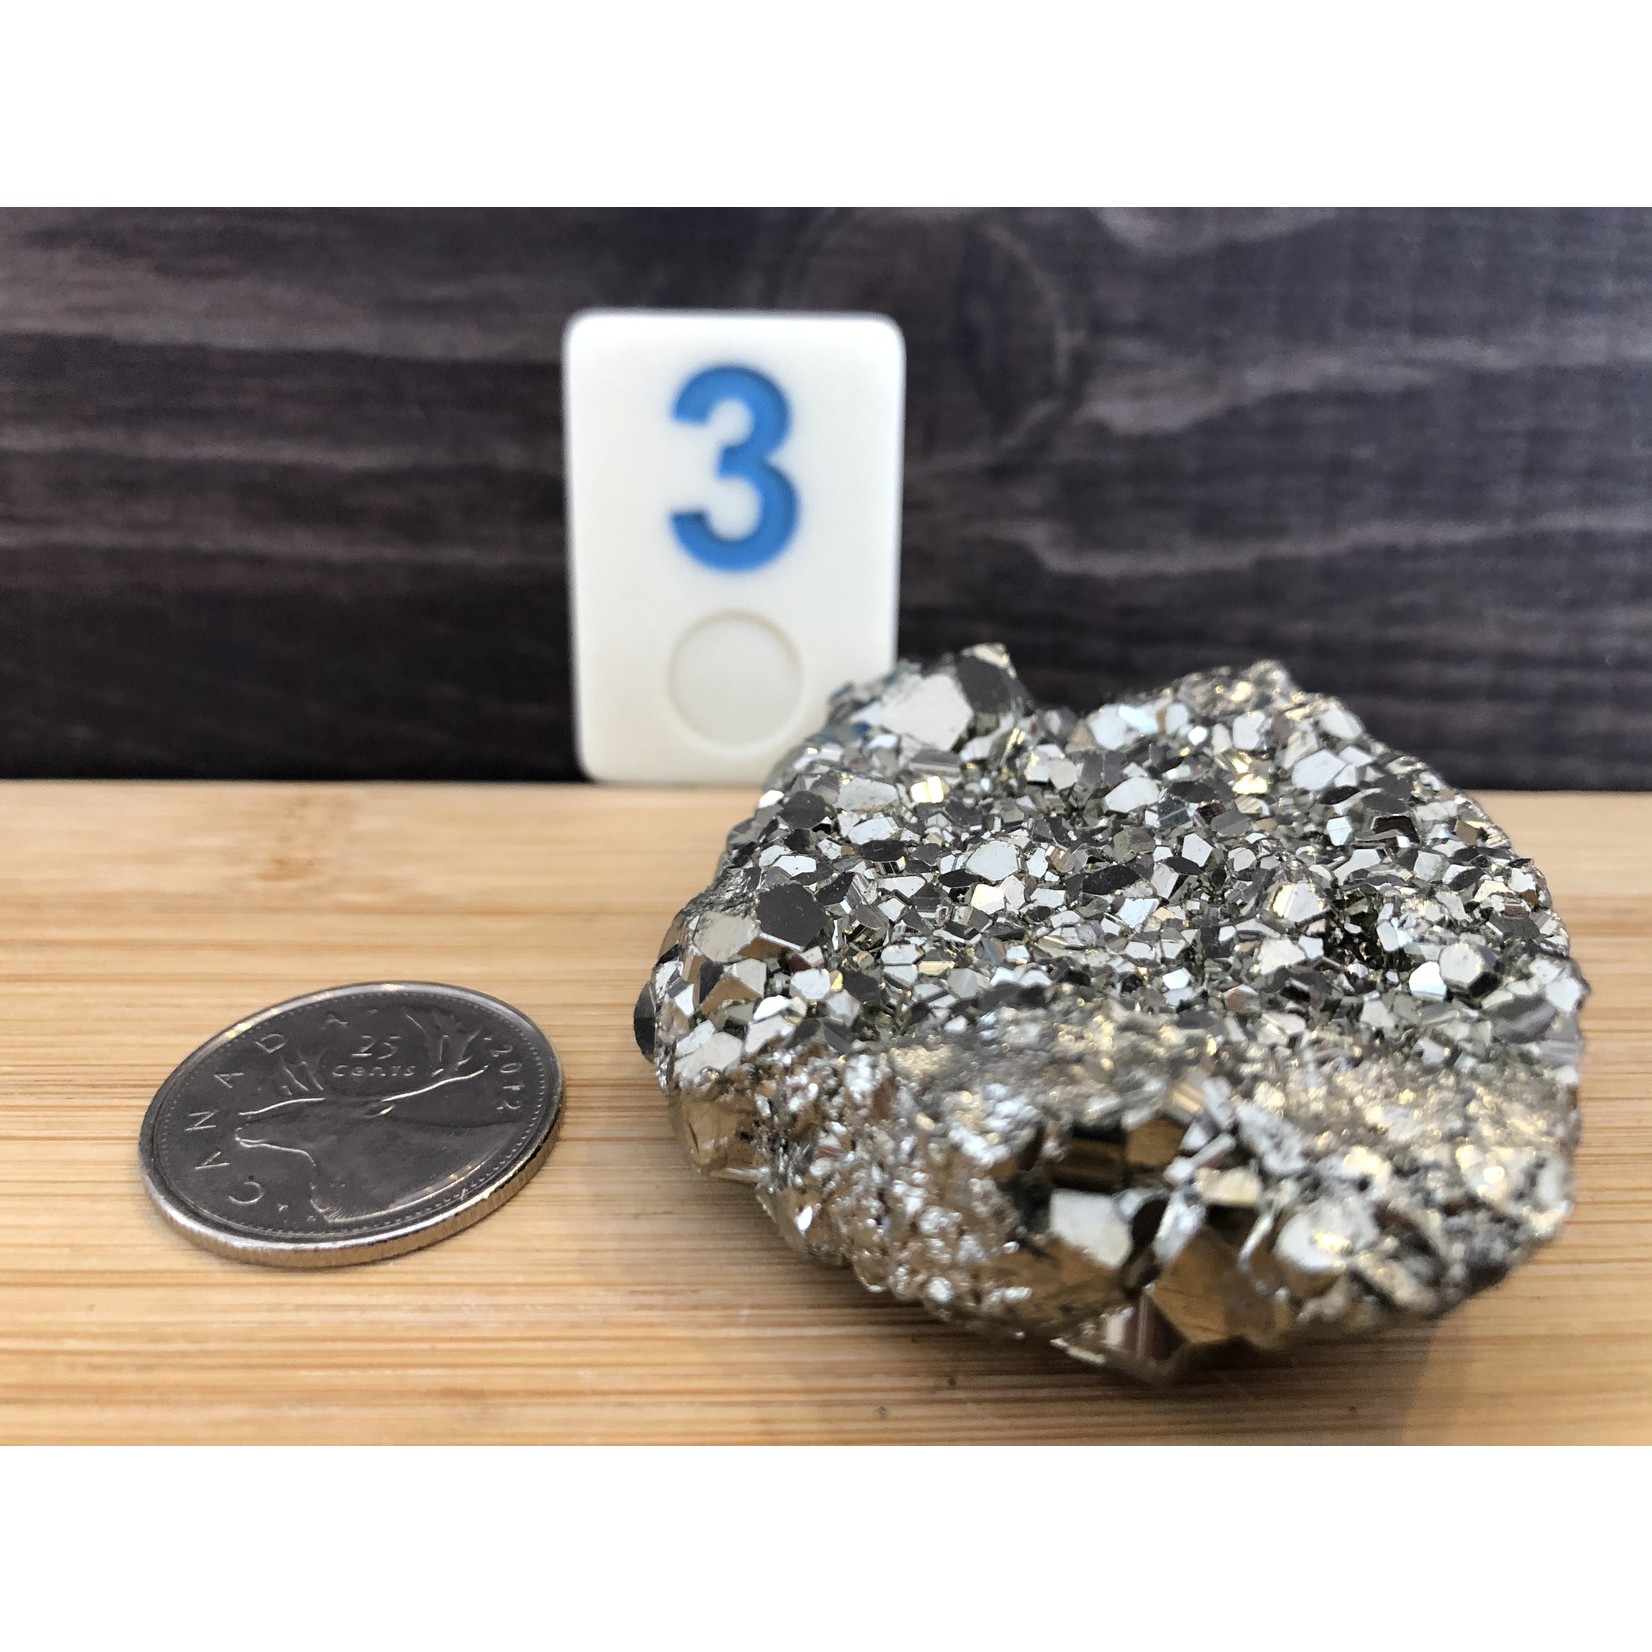 pyrite cluster